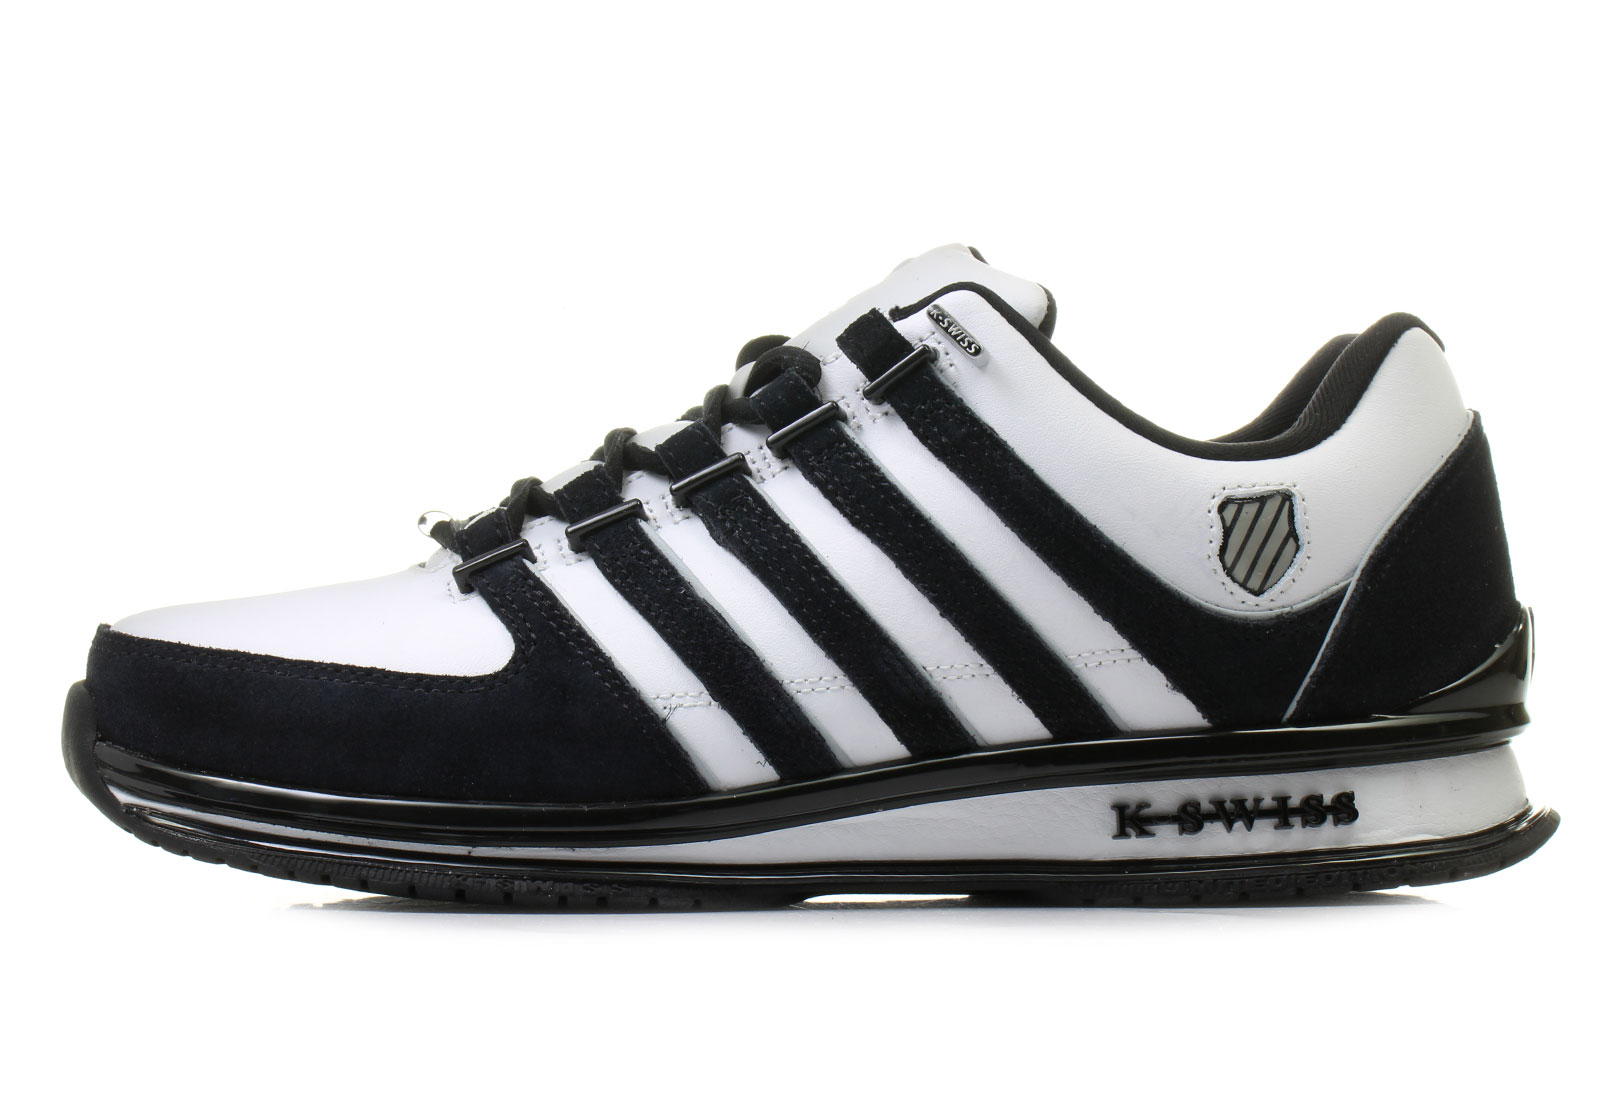 K-swiss Shoes - Rinzler Sp - 02283-192-M - Online shop for sneakers ...